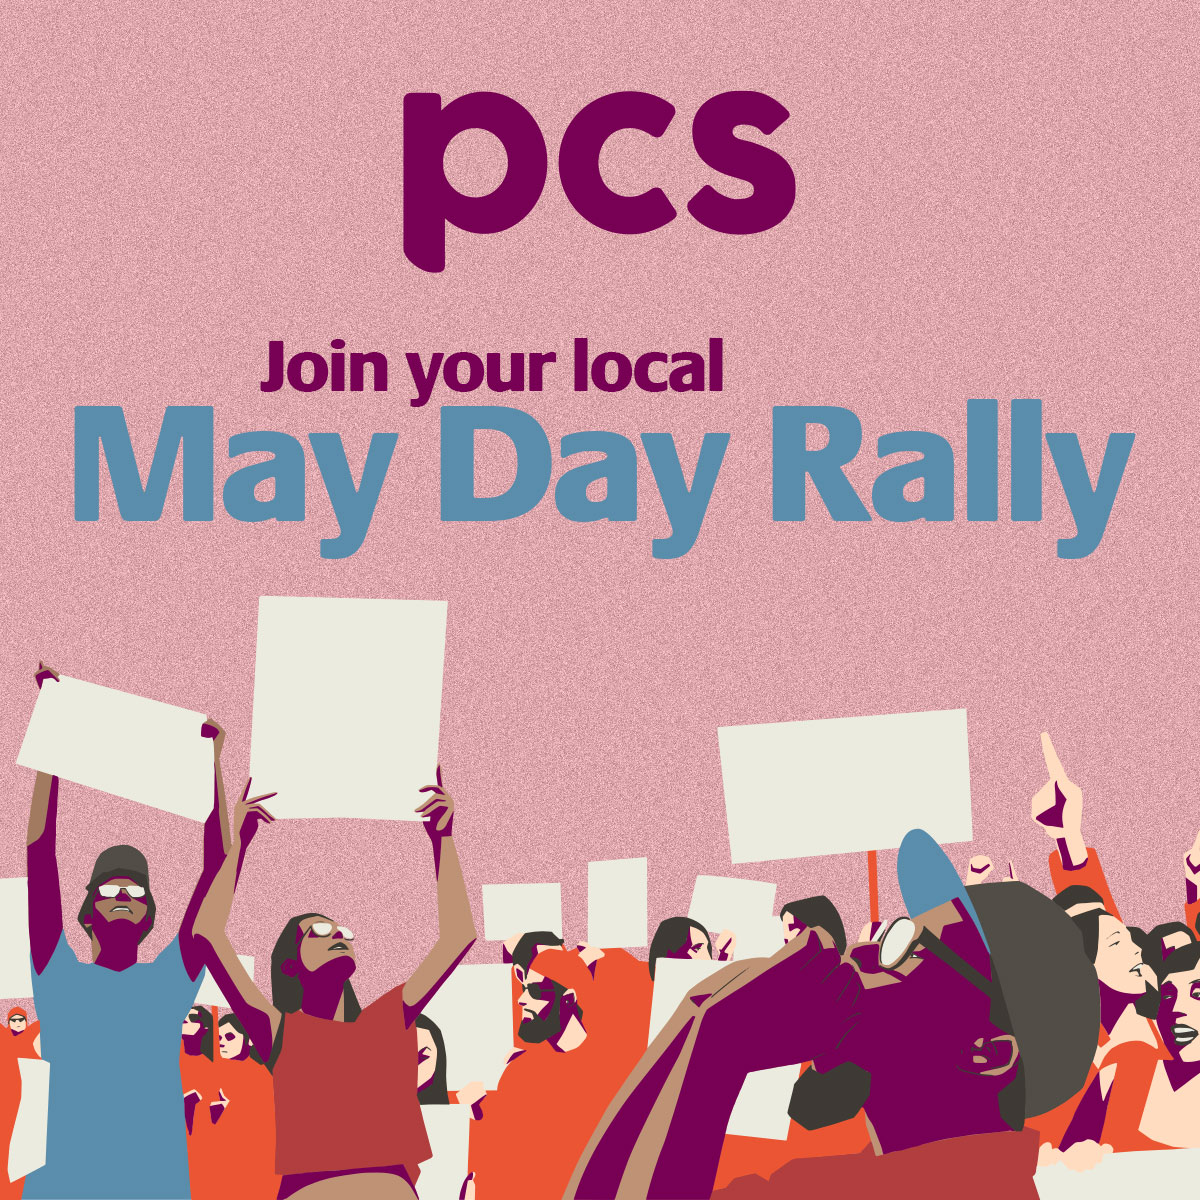 Find out what's going on near you to celebrate #MayDay and go along and involved. We've got details of events in Scotland, Northern Ireland and across England. pcs.org.uk/news-events/ne…